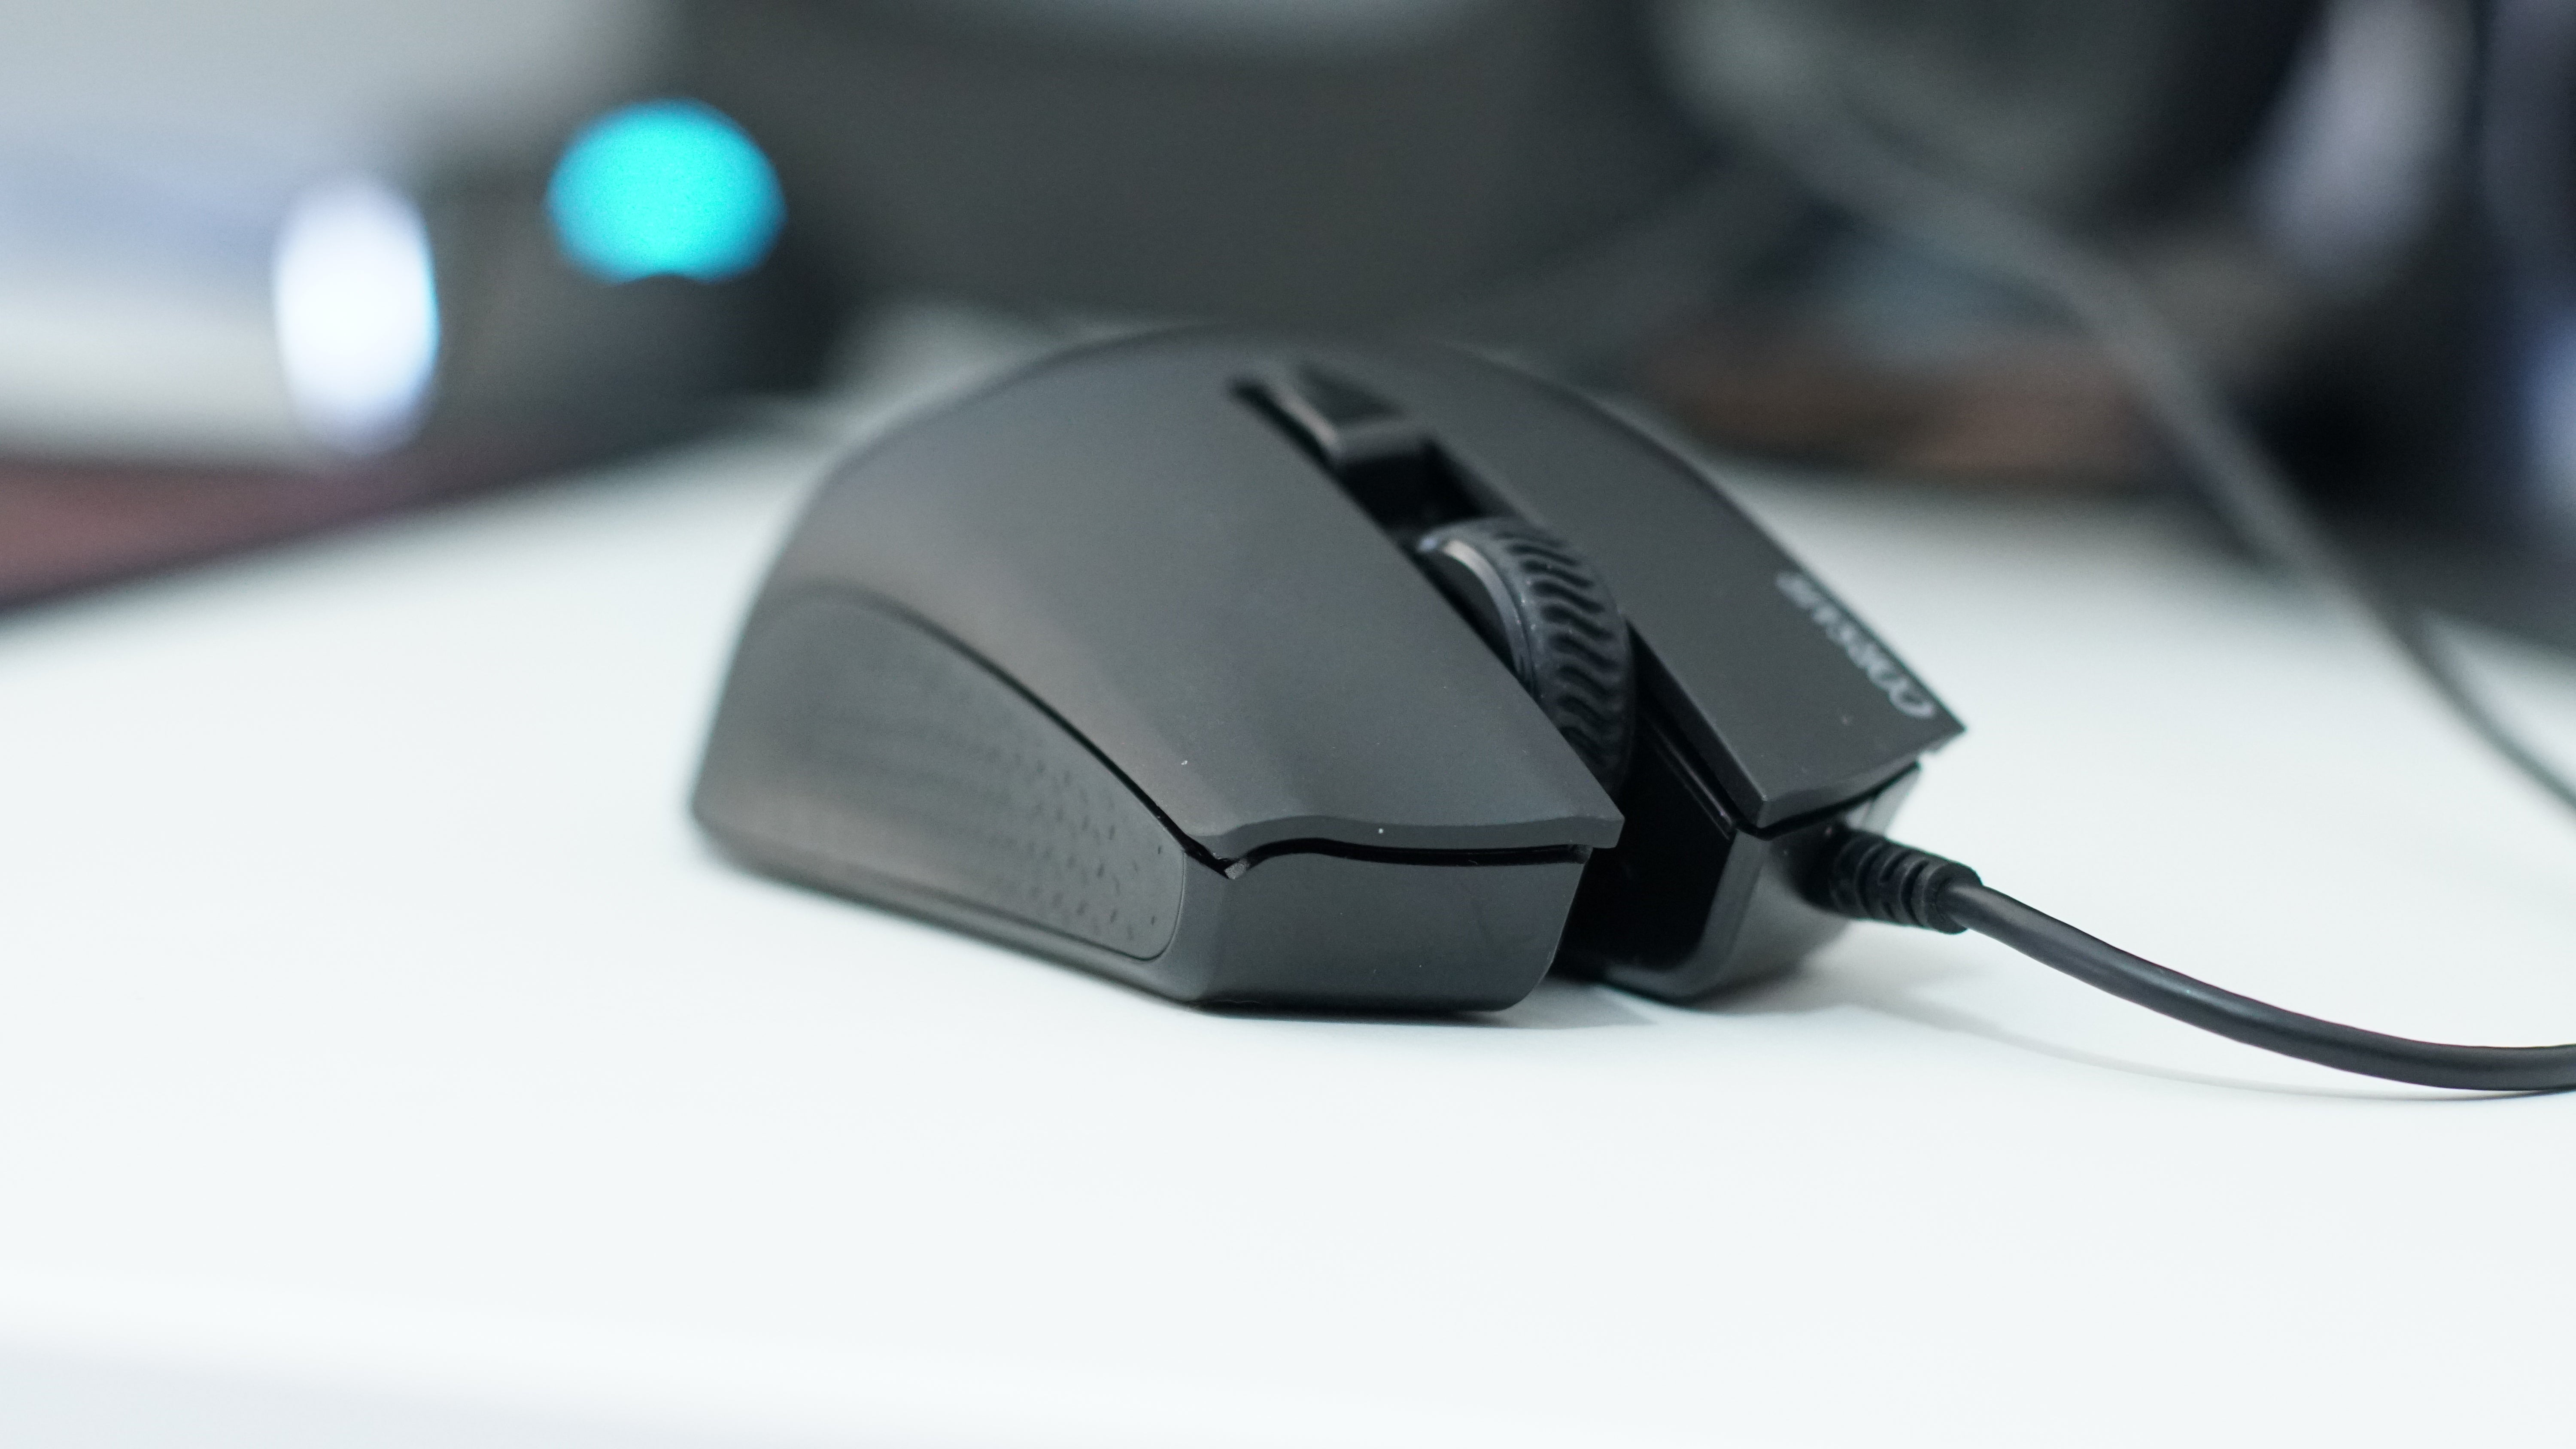 Close-up of a Corsair Harpoon wired gaming mouse on a desk.